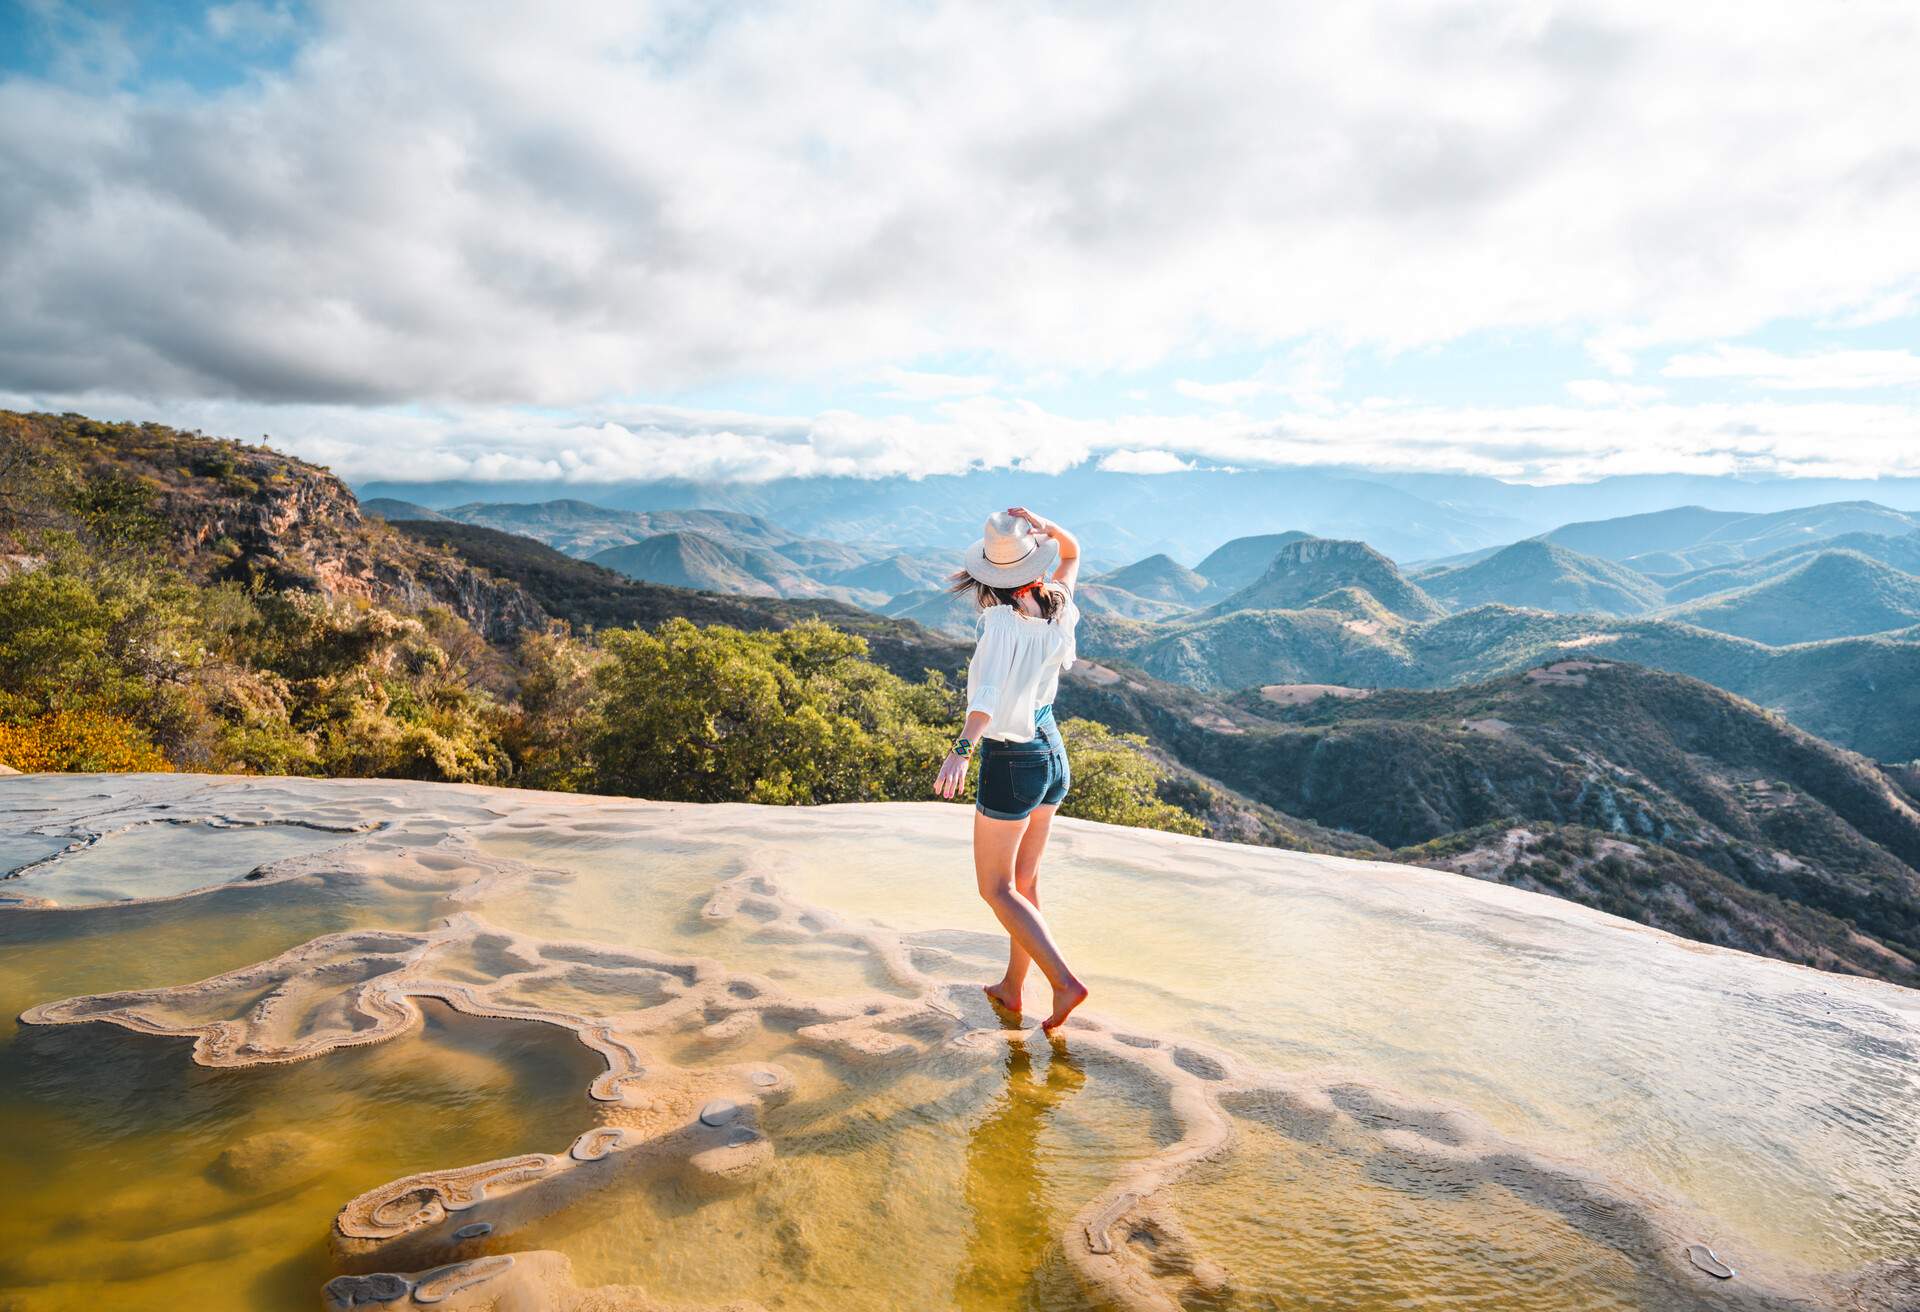 A woman stands on the natural rock formations where water trickles over the cliff overlooking the hills and cloud-capped mountains IN HIERVE EL AGUA